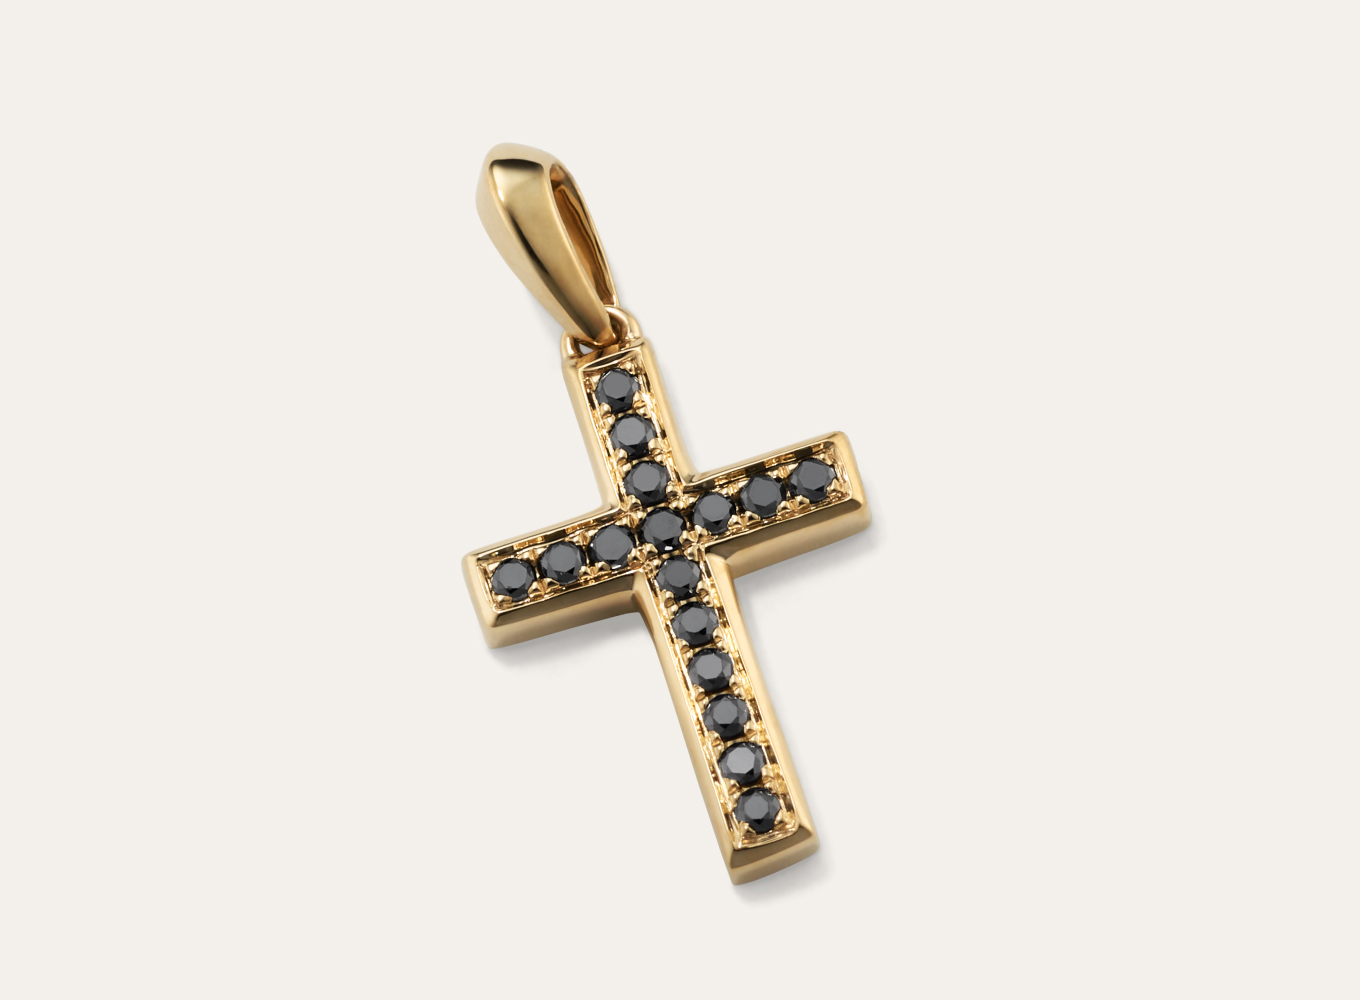 Crosby Black Diamond Cross Charm This bold 14-karat yellow gold cross charm features natural black diamonds, all hand matched for consistent color. Add a chain to turn this beautiful symbol of faith into a necklace.